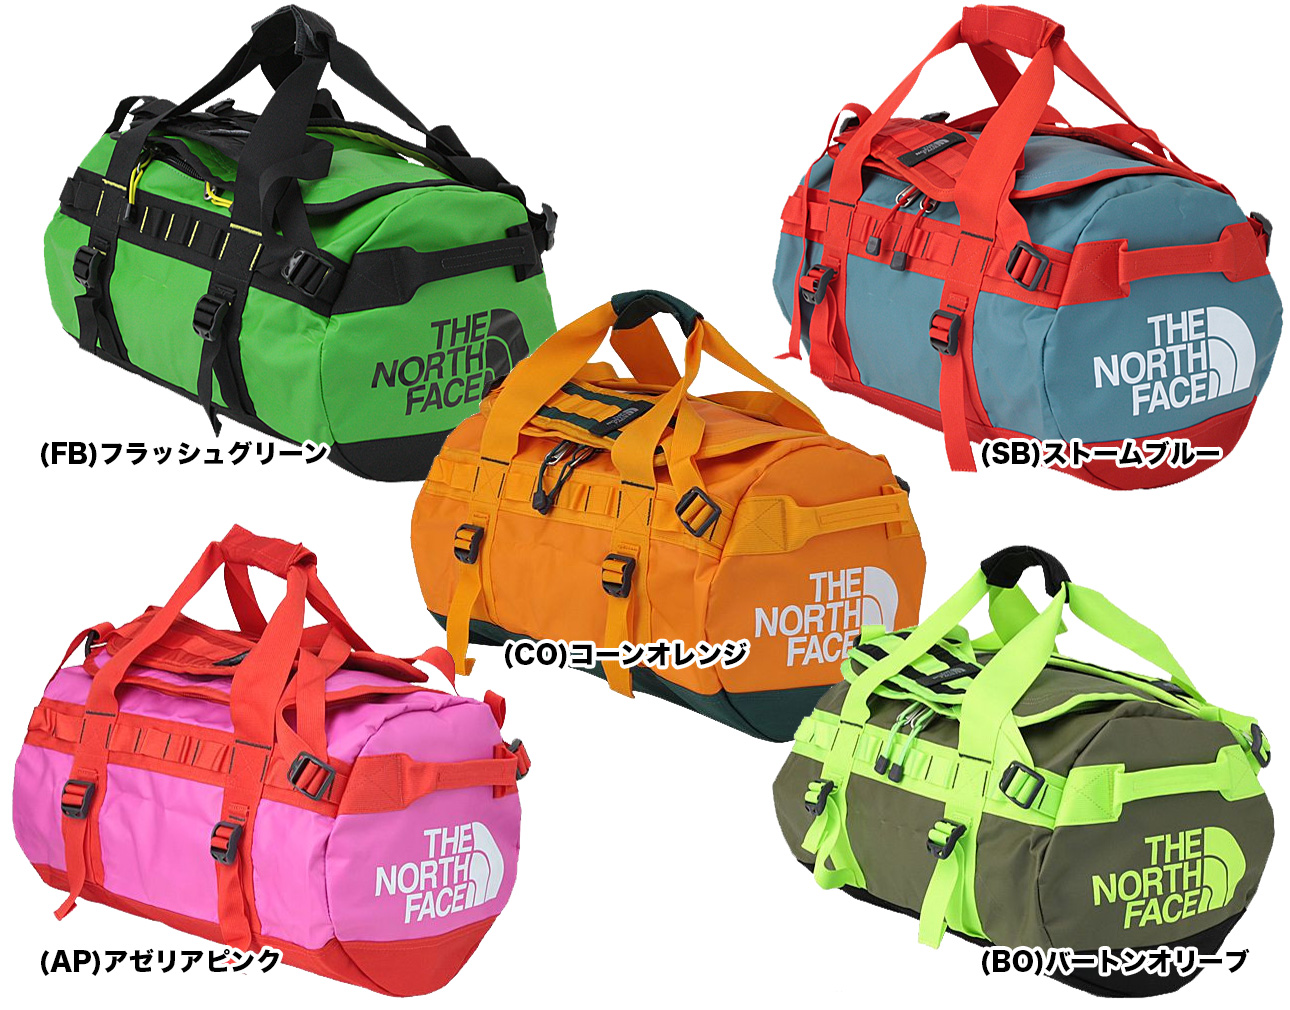 THE NORTH FACE ダッフルバッグ NM81303 XS 25L